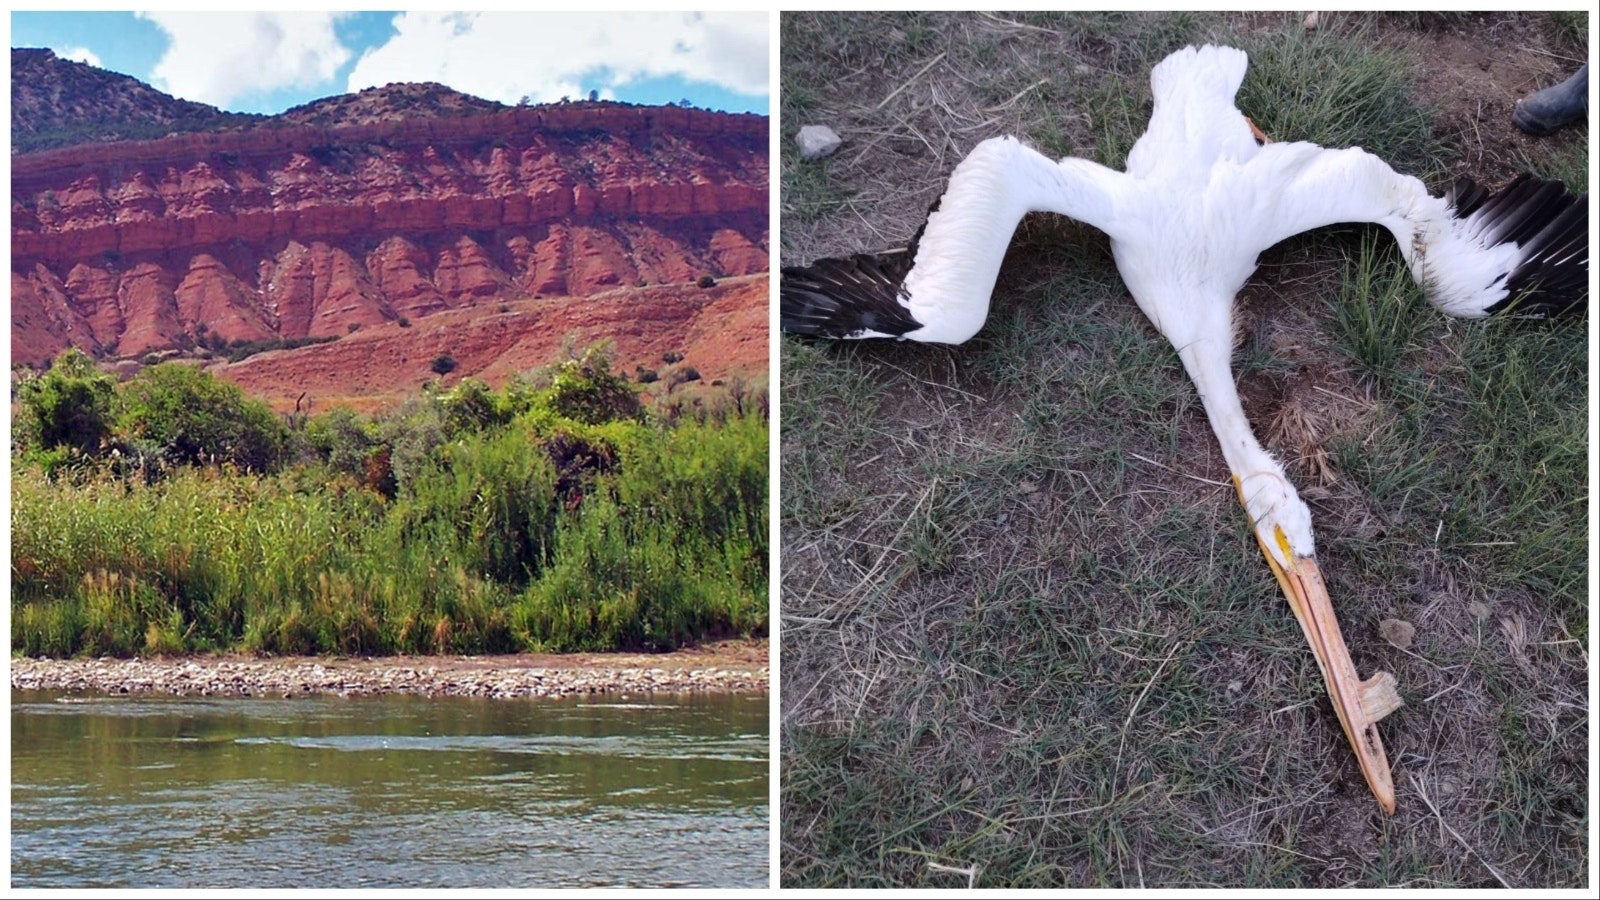 This pelican was shot at 9-mile Lake west of Laramie. Huge flocks of the fish-gulping birds were ruining the angling there. A special permit is required to shoot pelicans, which are a federally-protected migratory bird species.